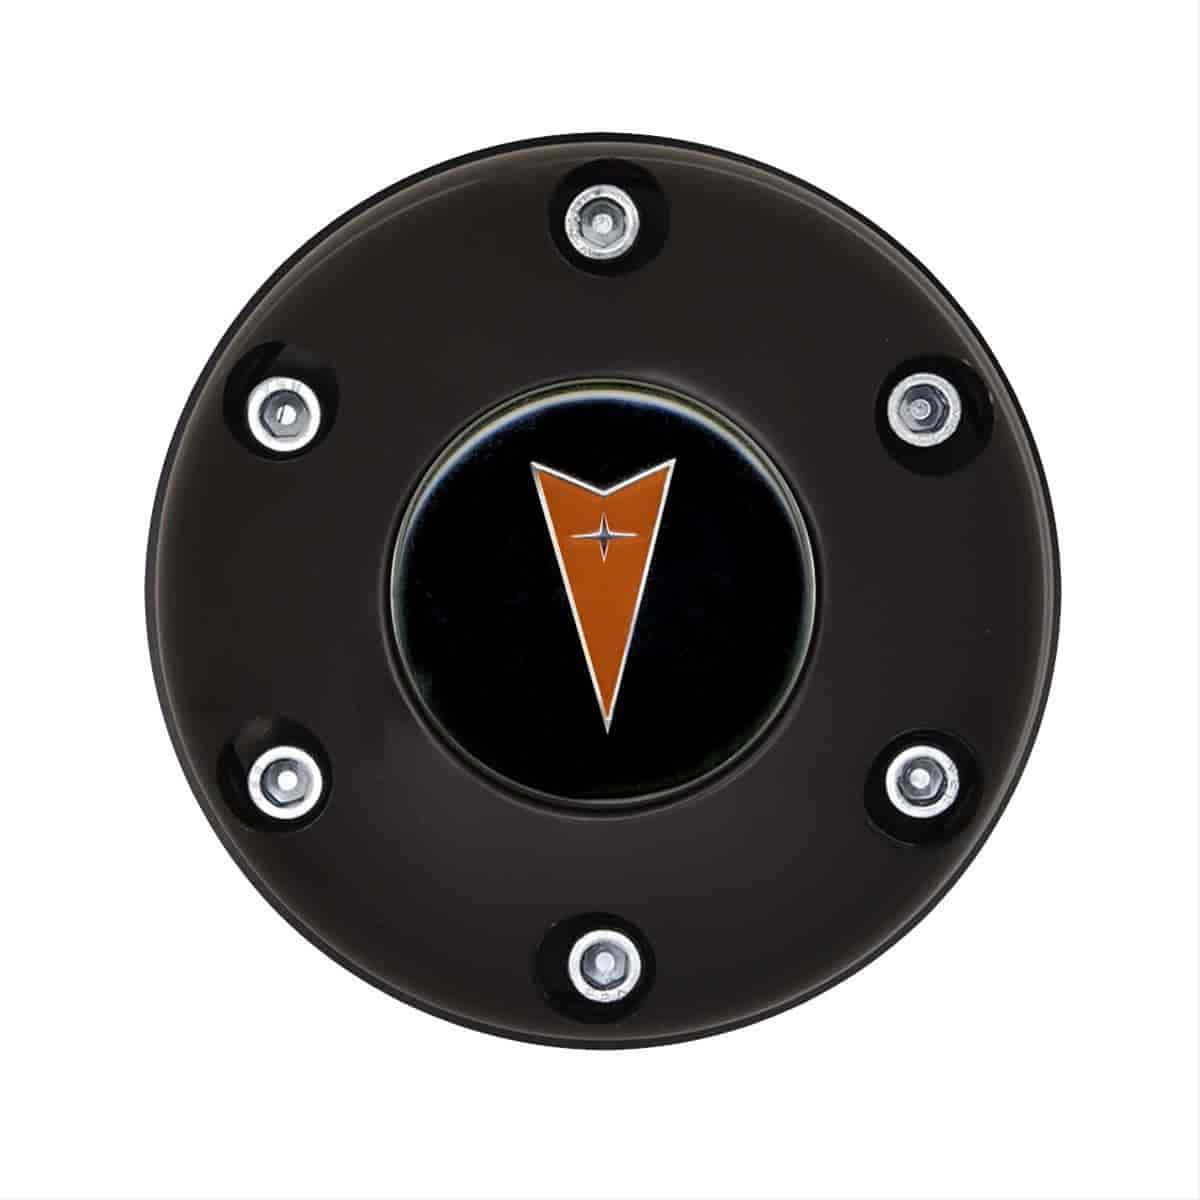 GT3 Gasser/Euro Style Horn Button Pontiac Logo Colored 6-Hole Style Black Anodized